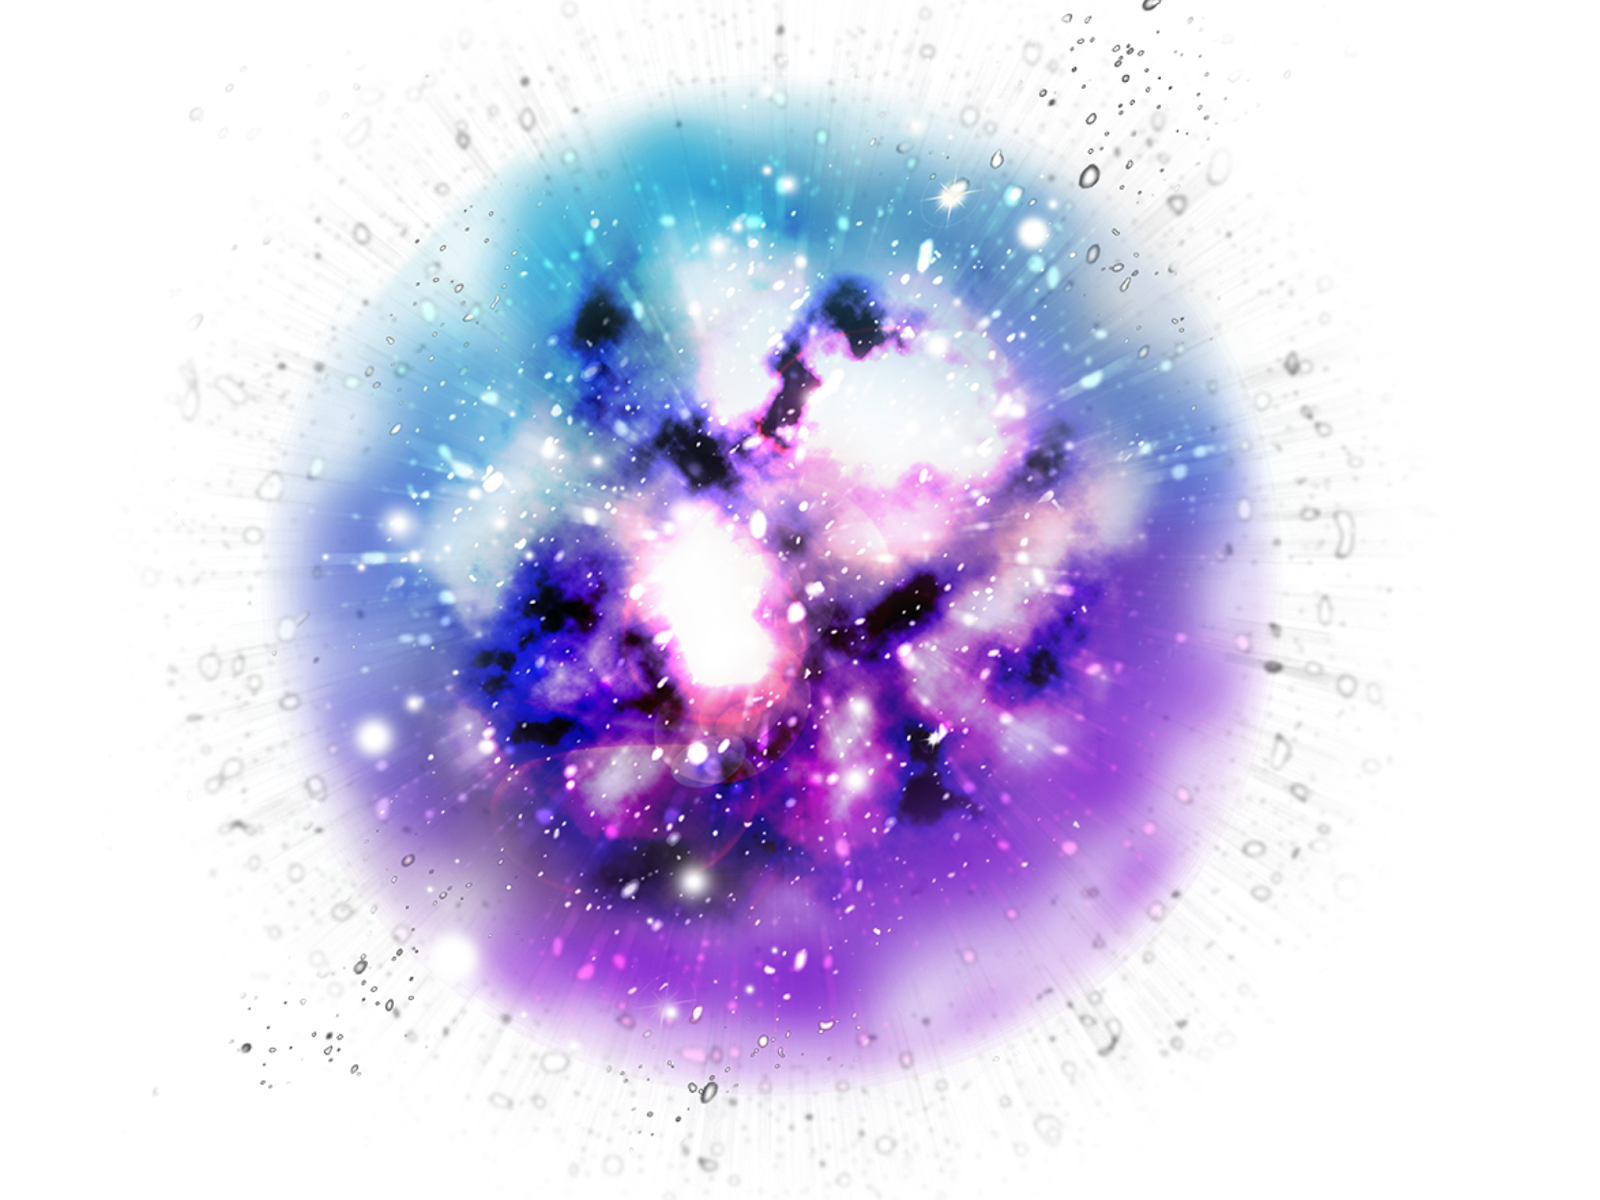 Photoshop &, Mobile Editing: Stardust PNG .... For Editors who Dnt 